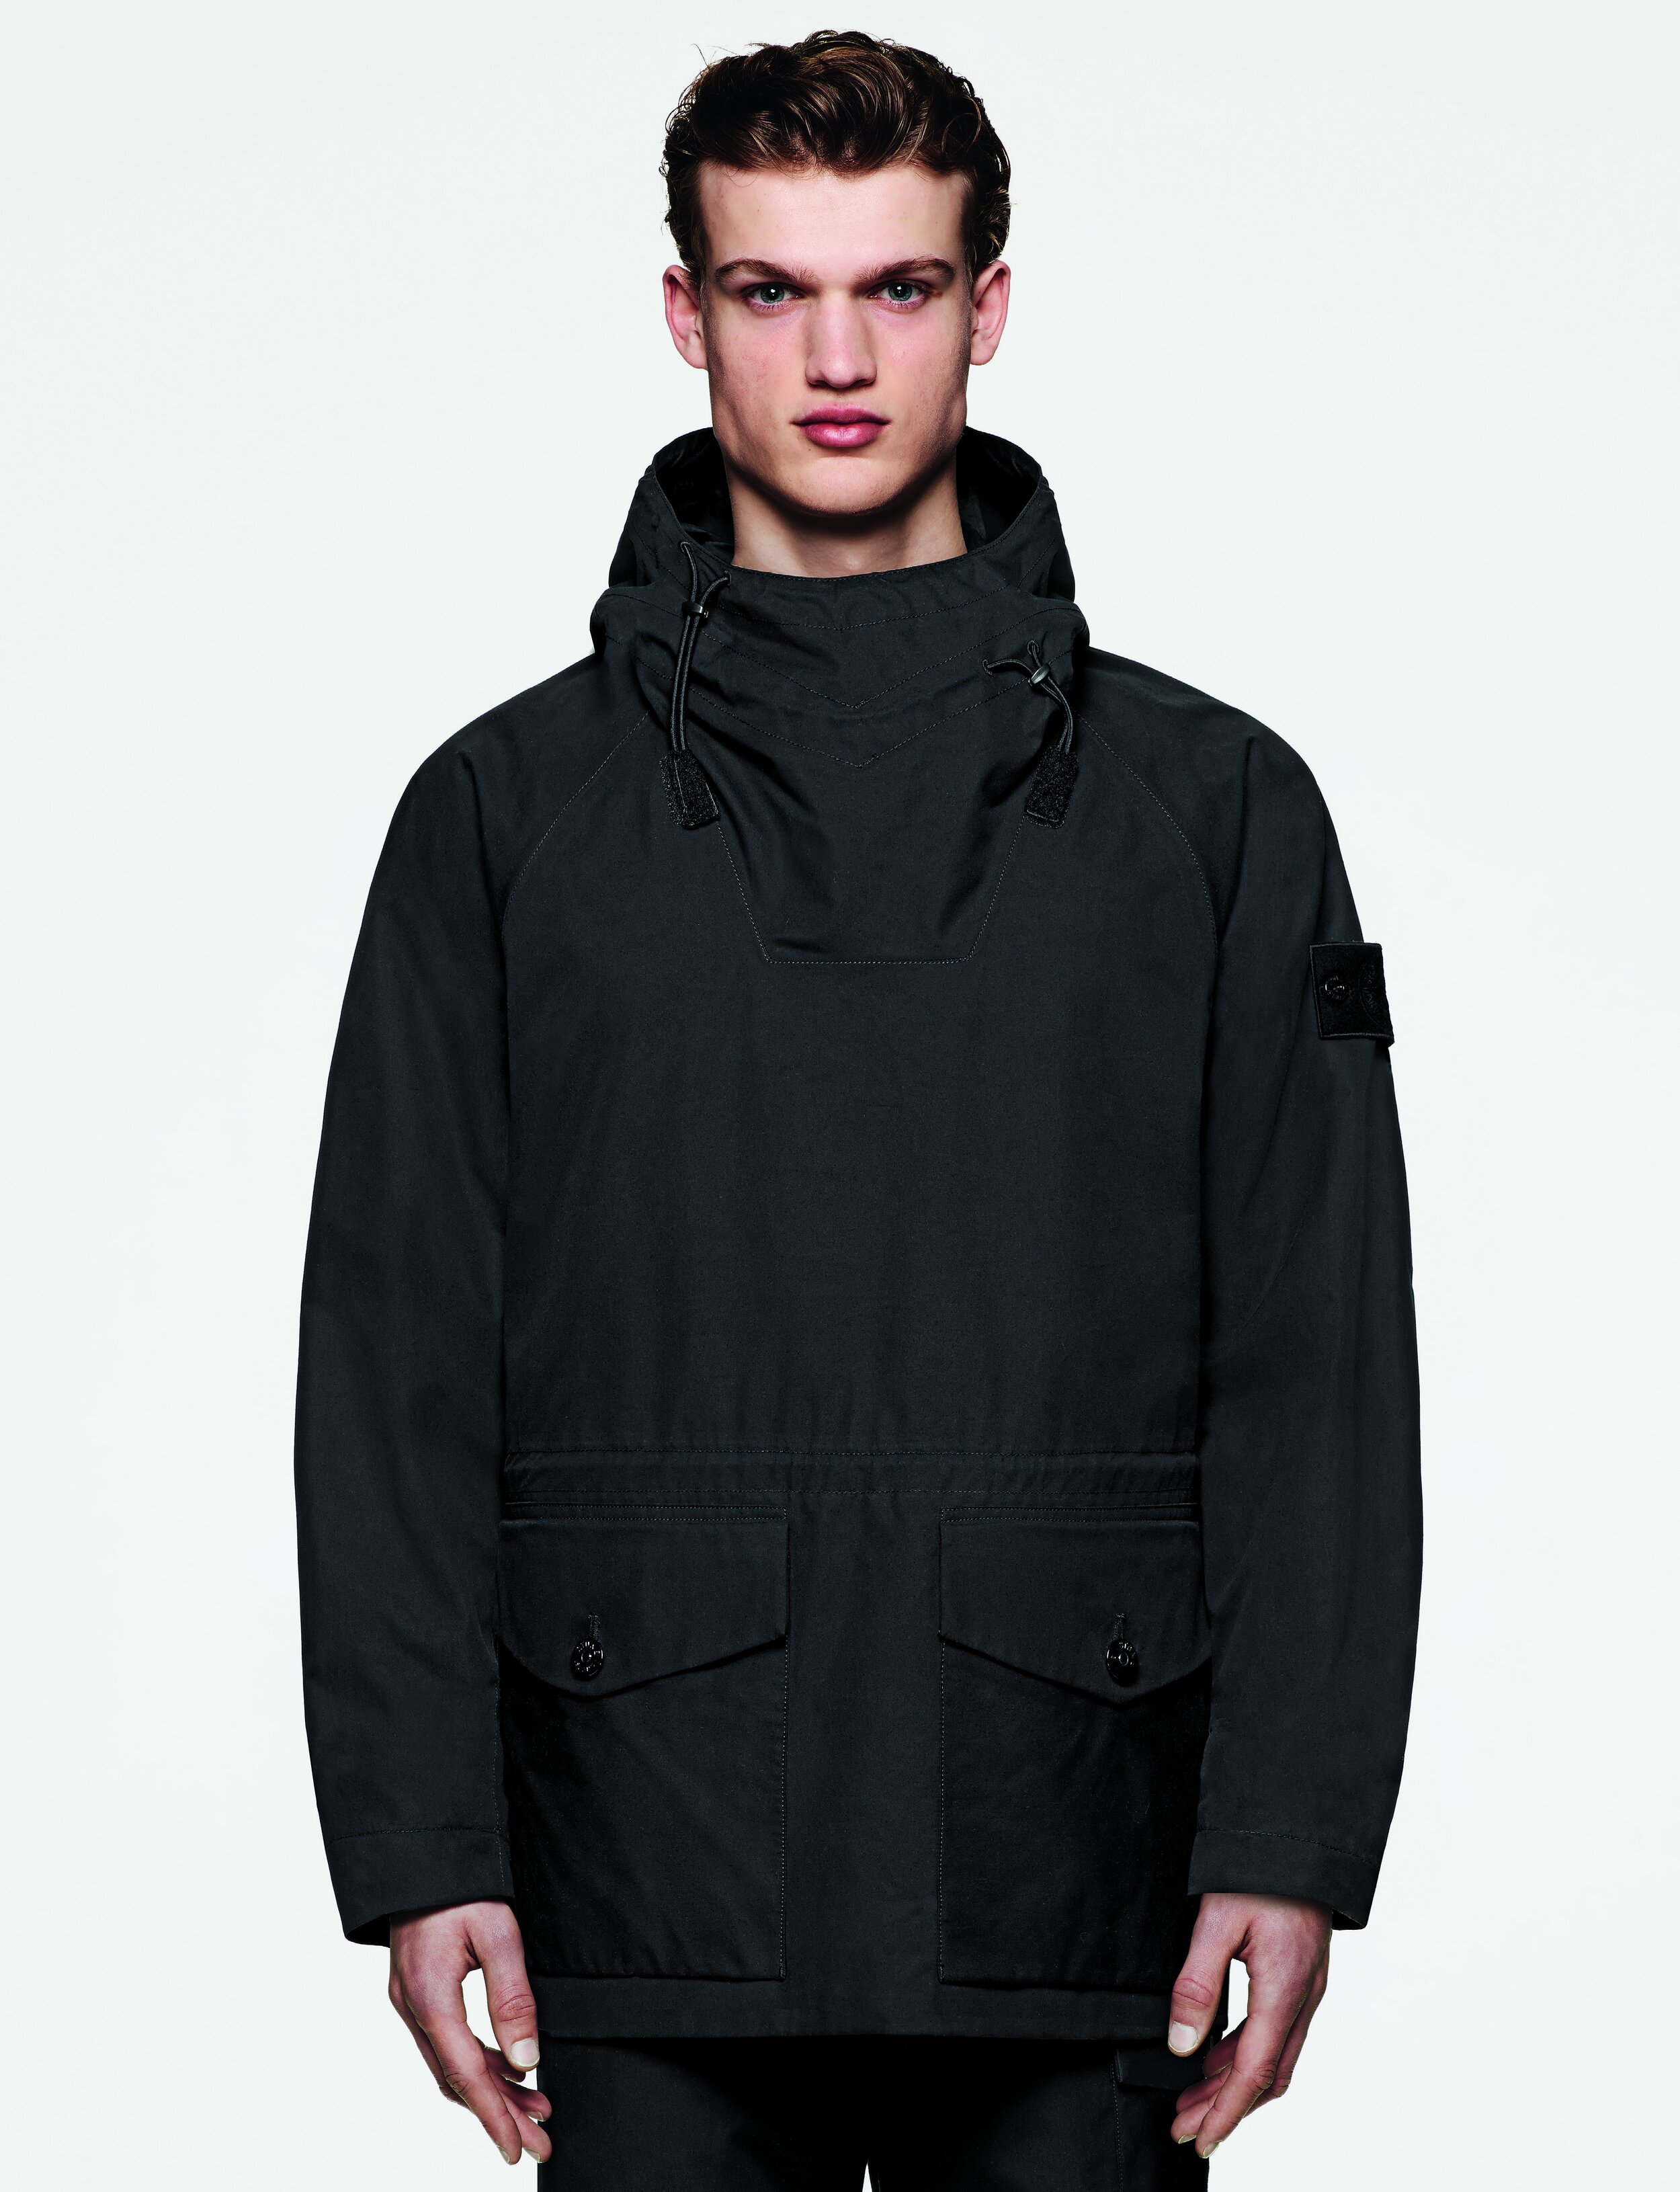 STONE ISLAND: AW22 GHOST PIECES — THE NEW ORDER